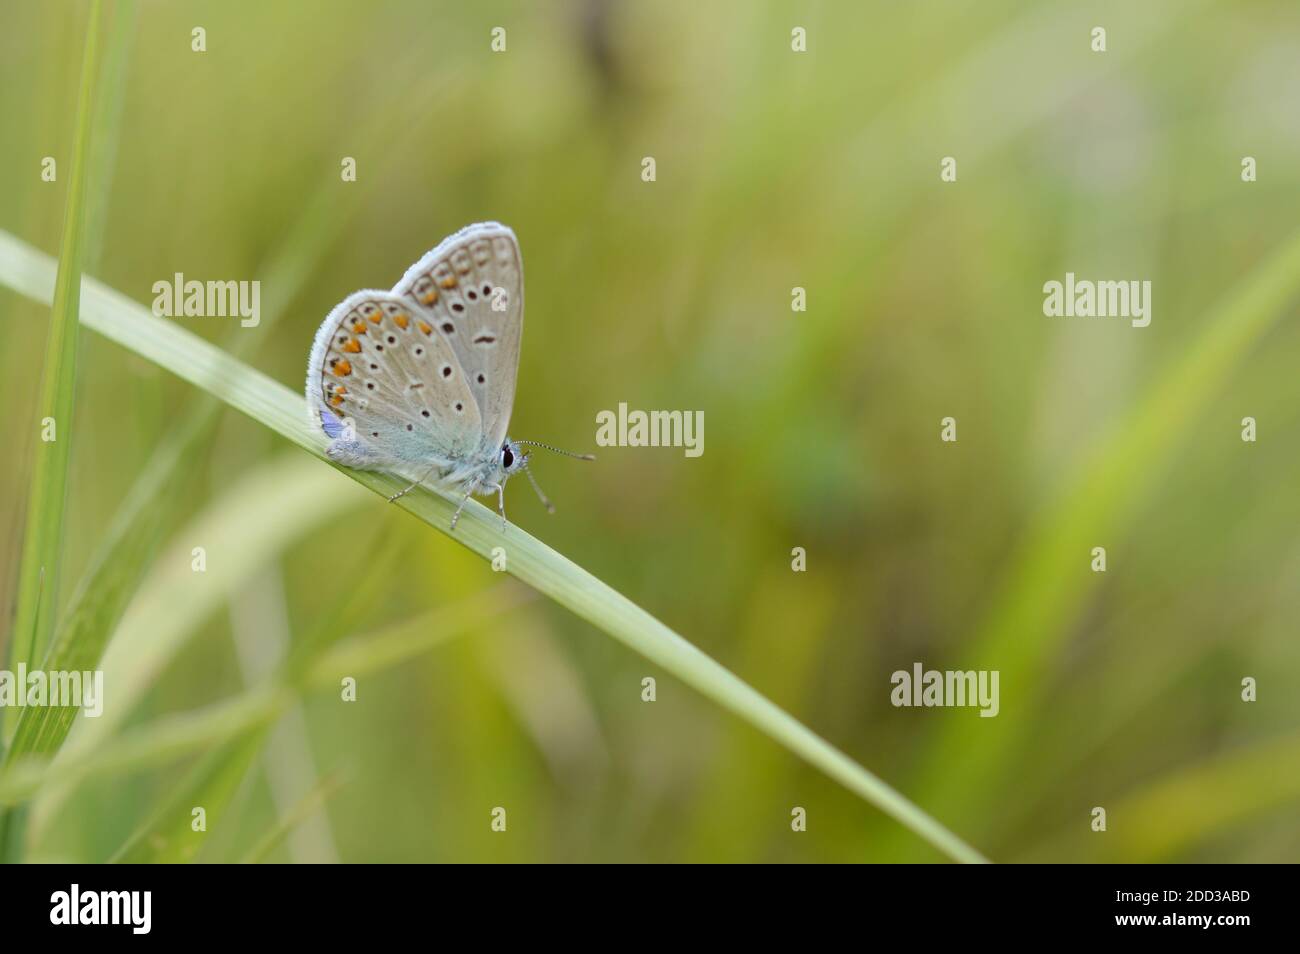 Common blue, small blue and grey tiny butterfly on a green plant close up, butterfly with black and orange spots, green background. Stock Photo